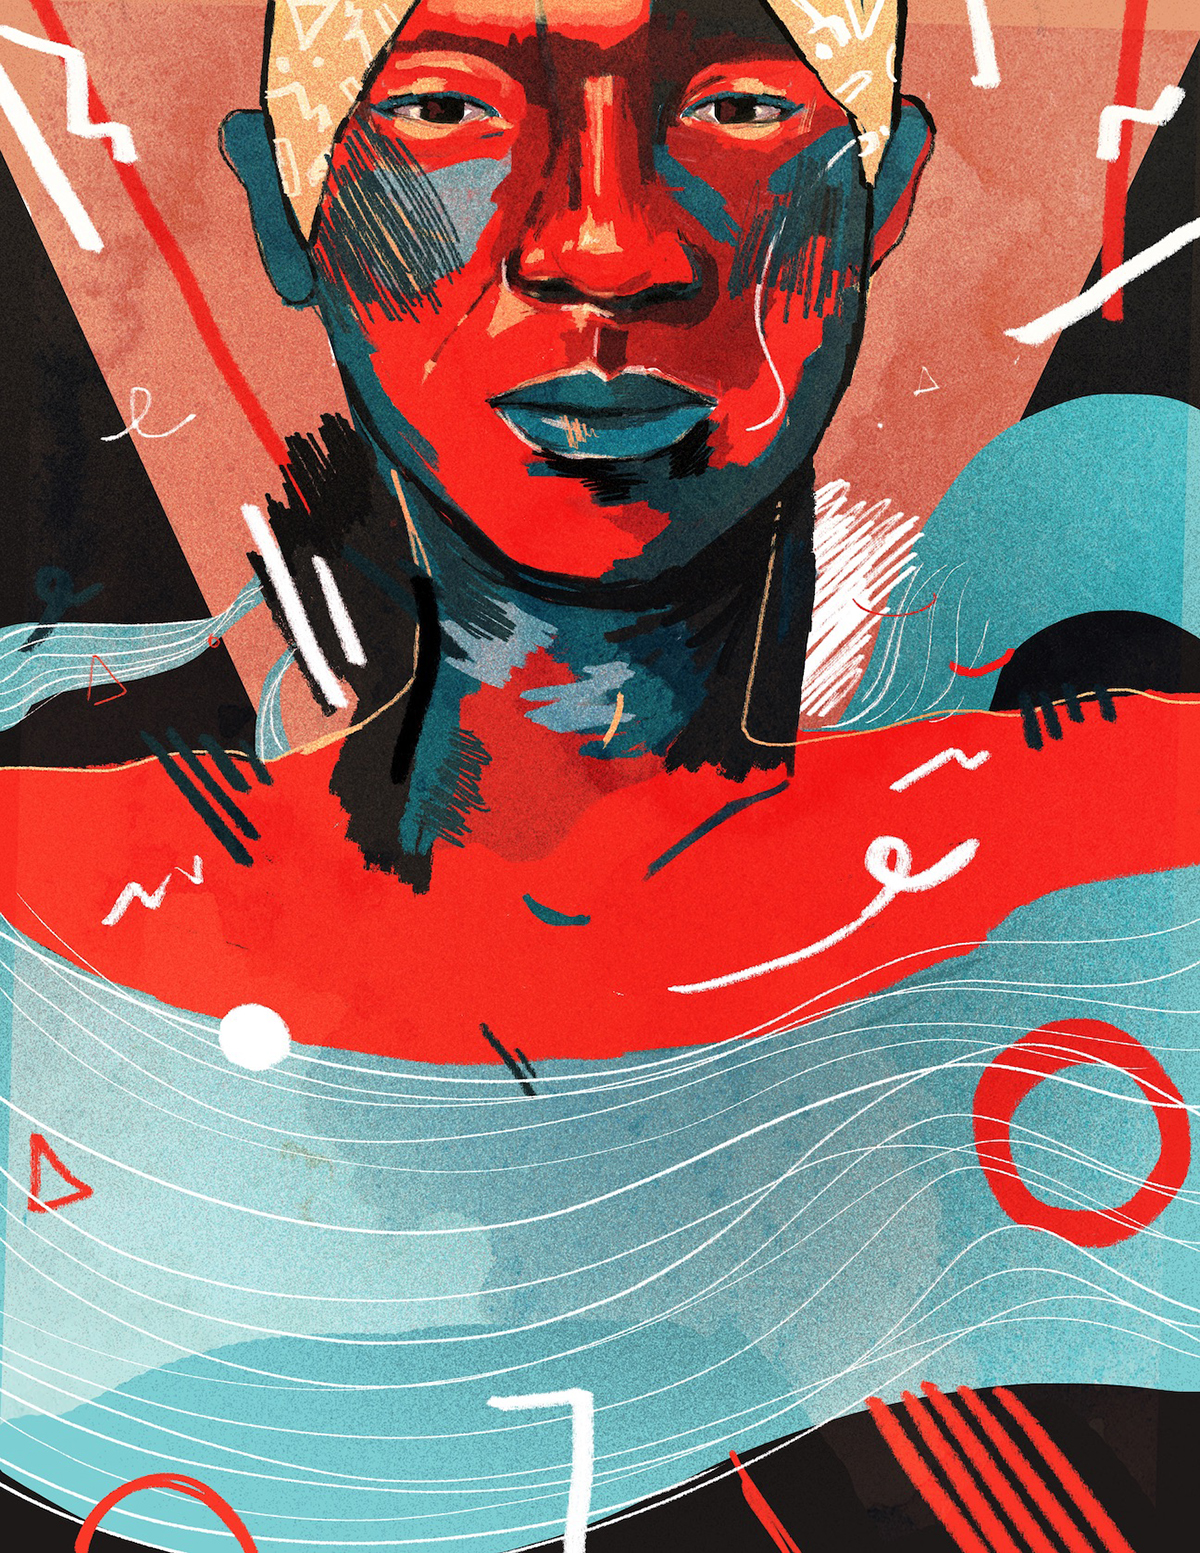 A digital painting by Adrian Nyehart of a femme-bodied person with red and blue skin, a head wrapping, and trianglular and swirling markings floating across the page.